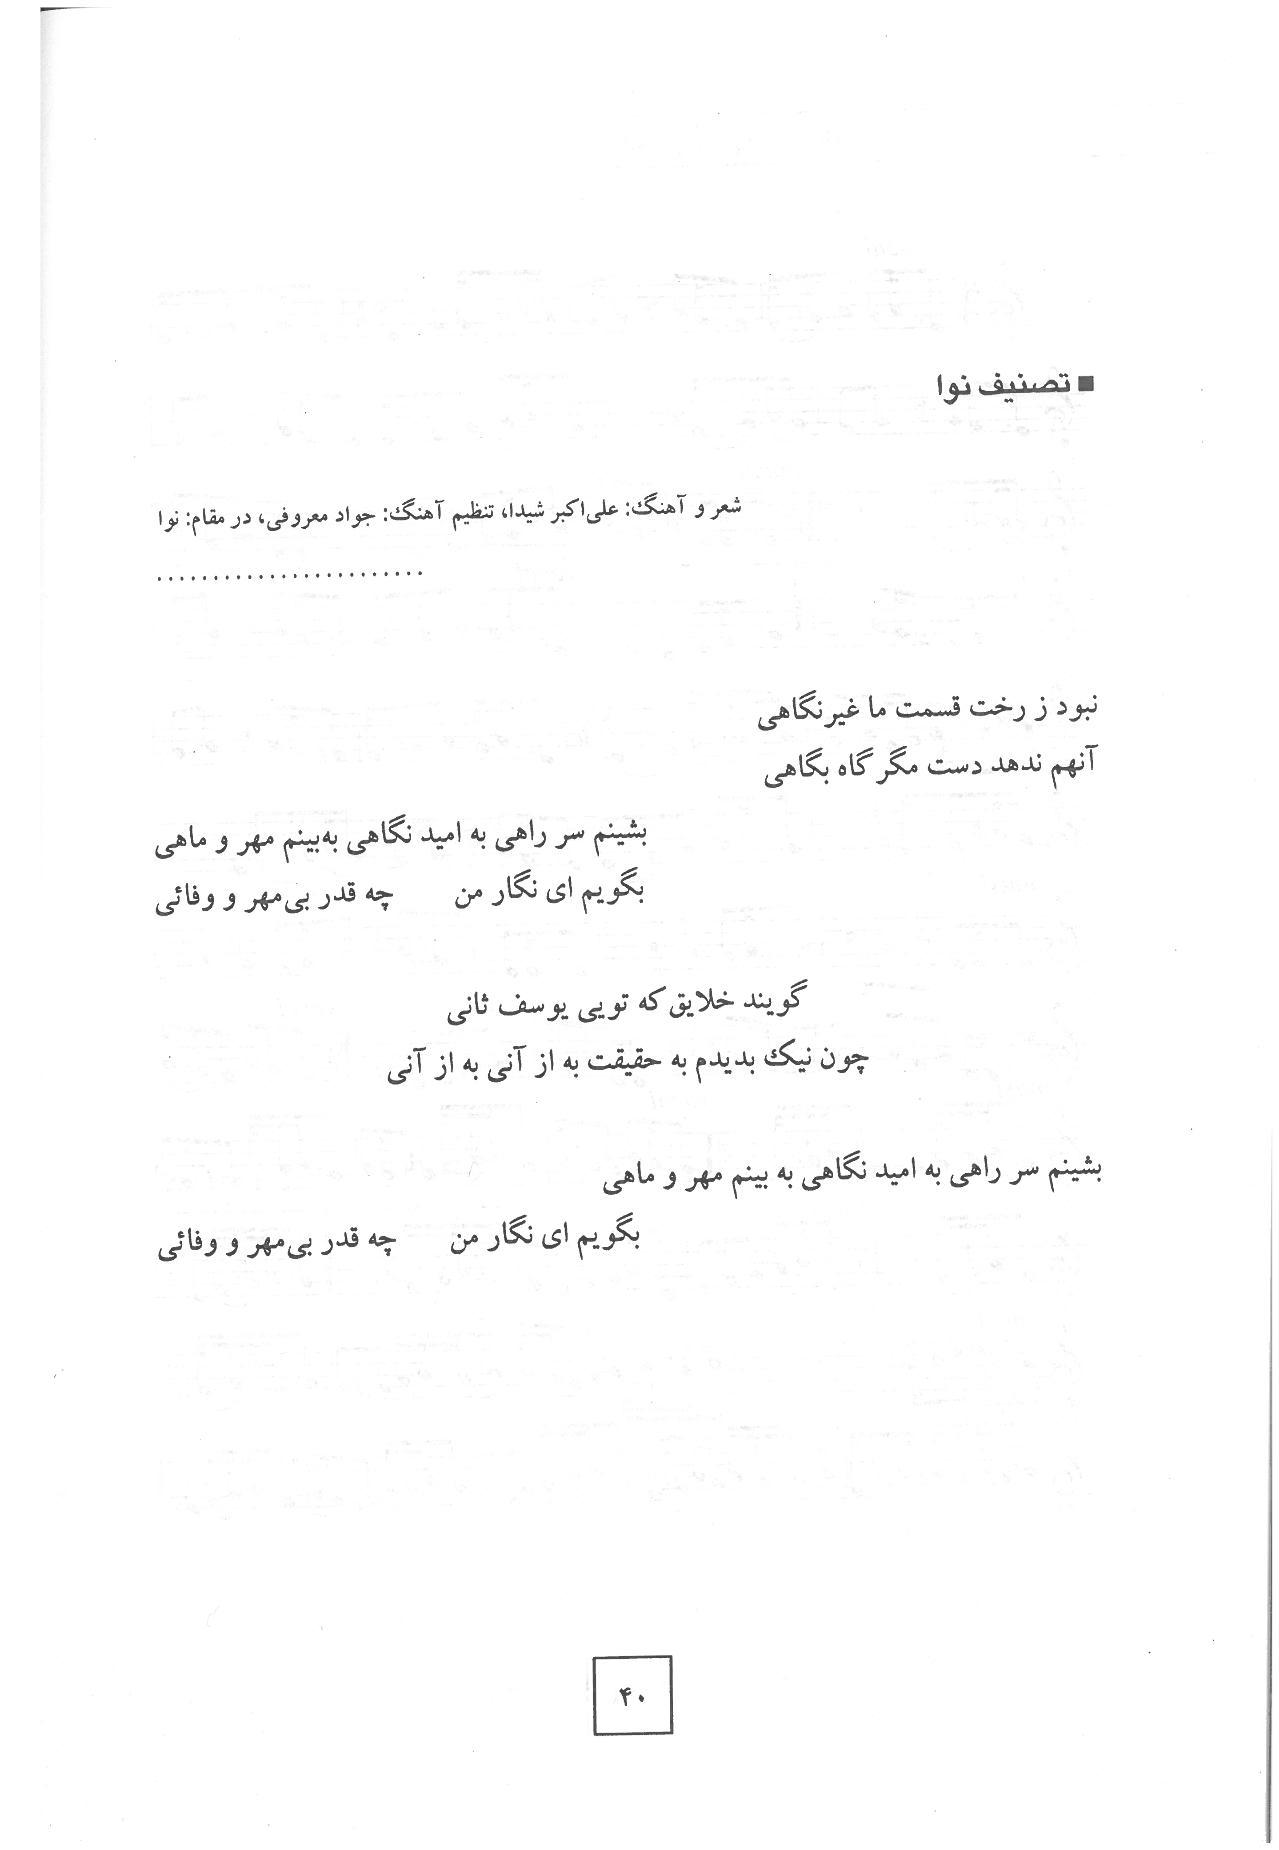 A page of handwritten text on paper.